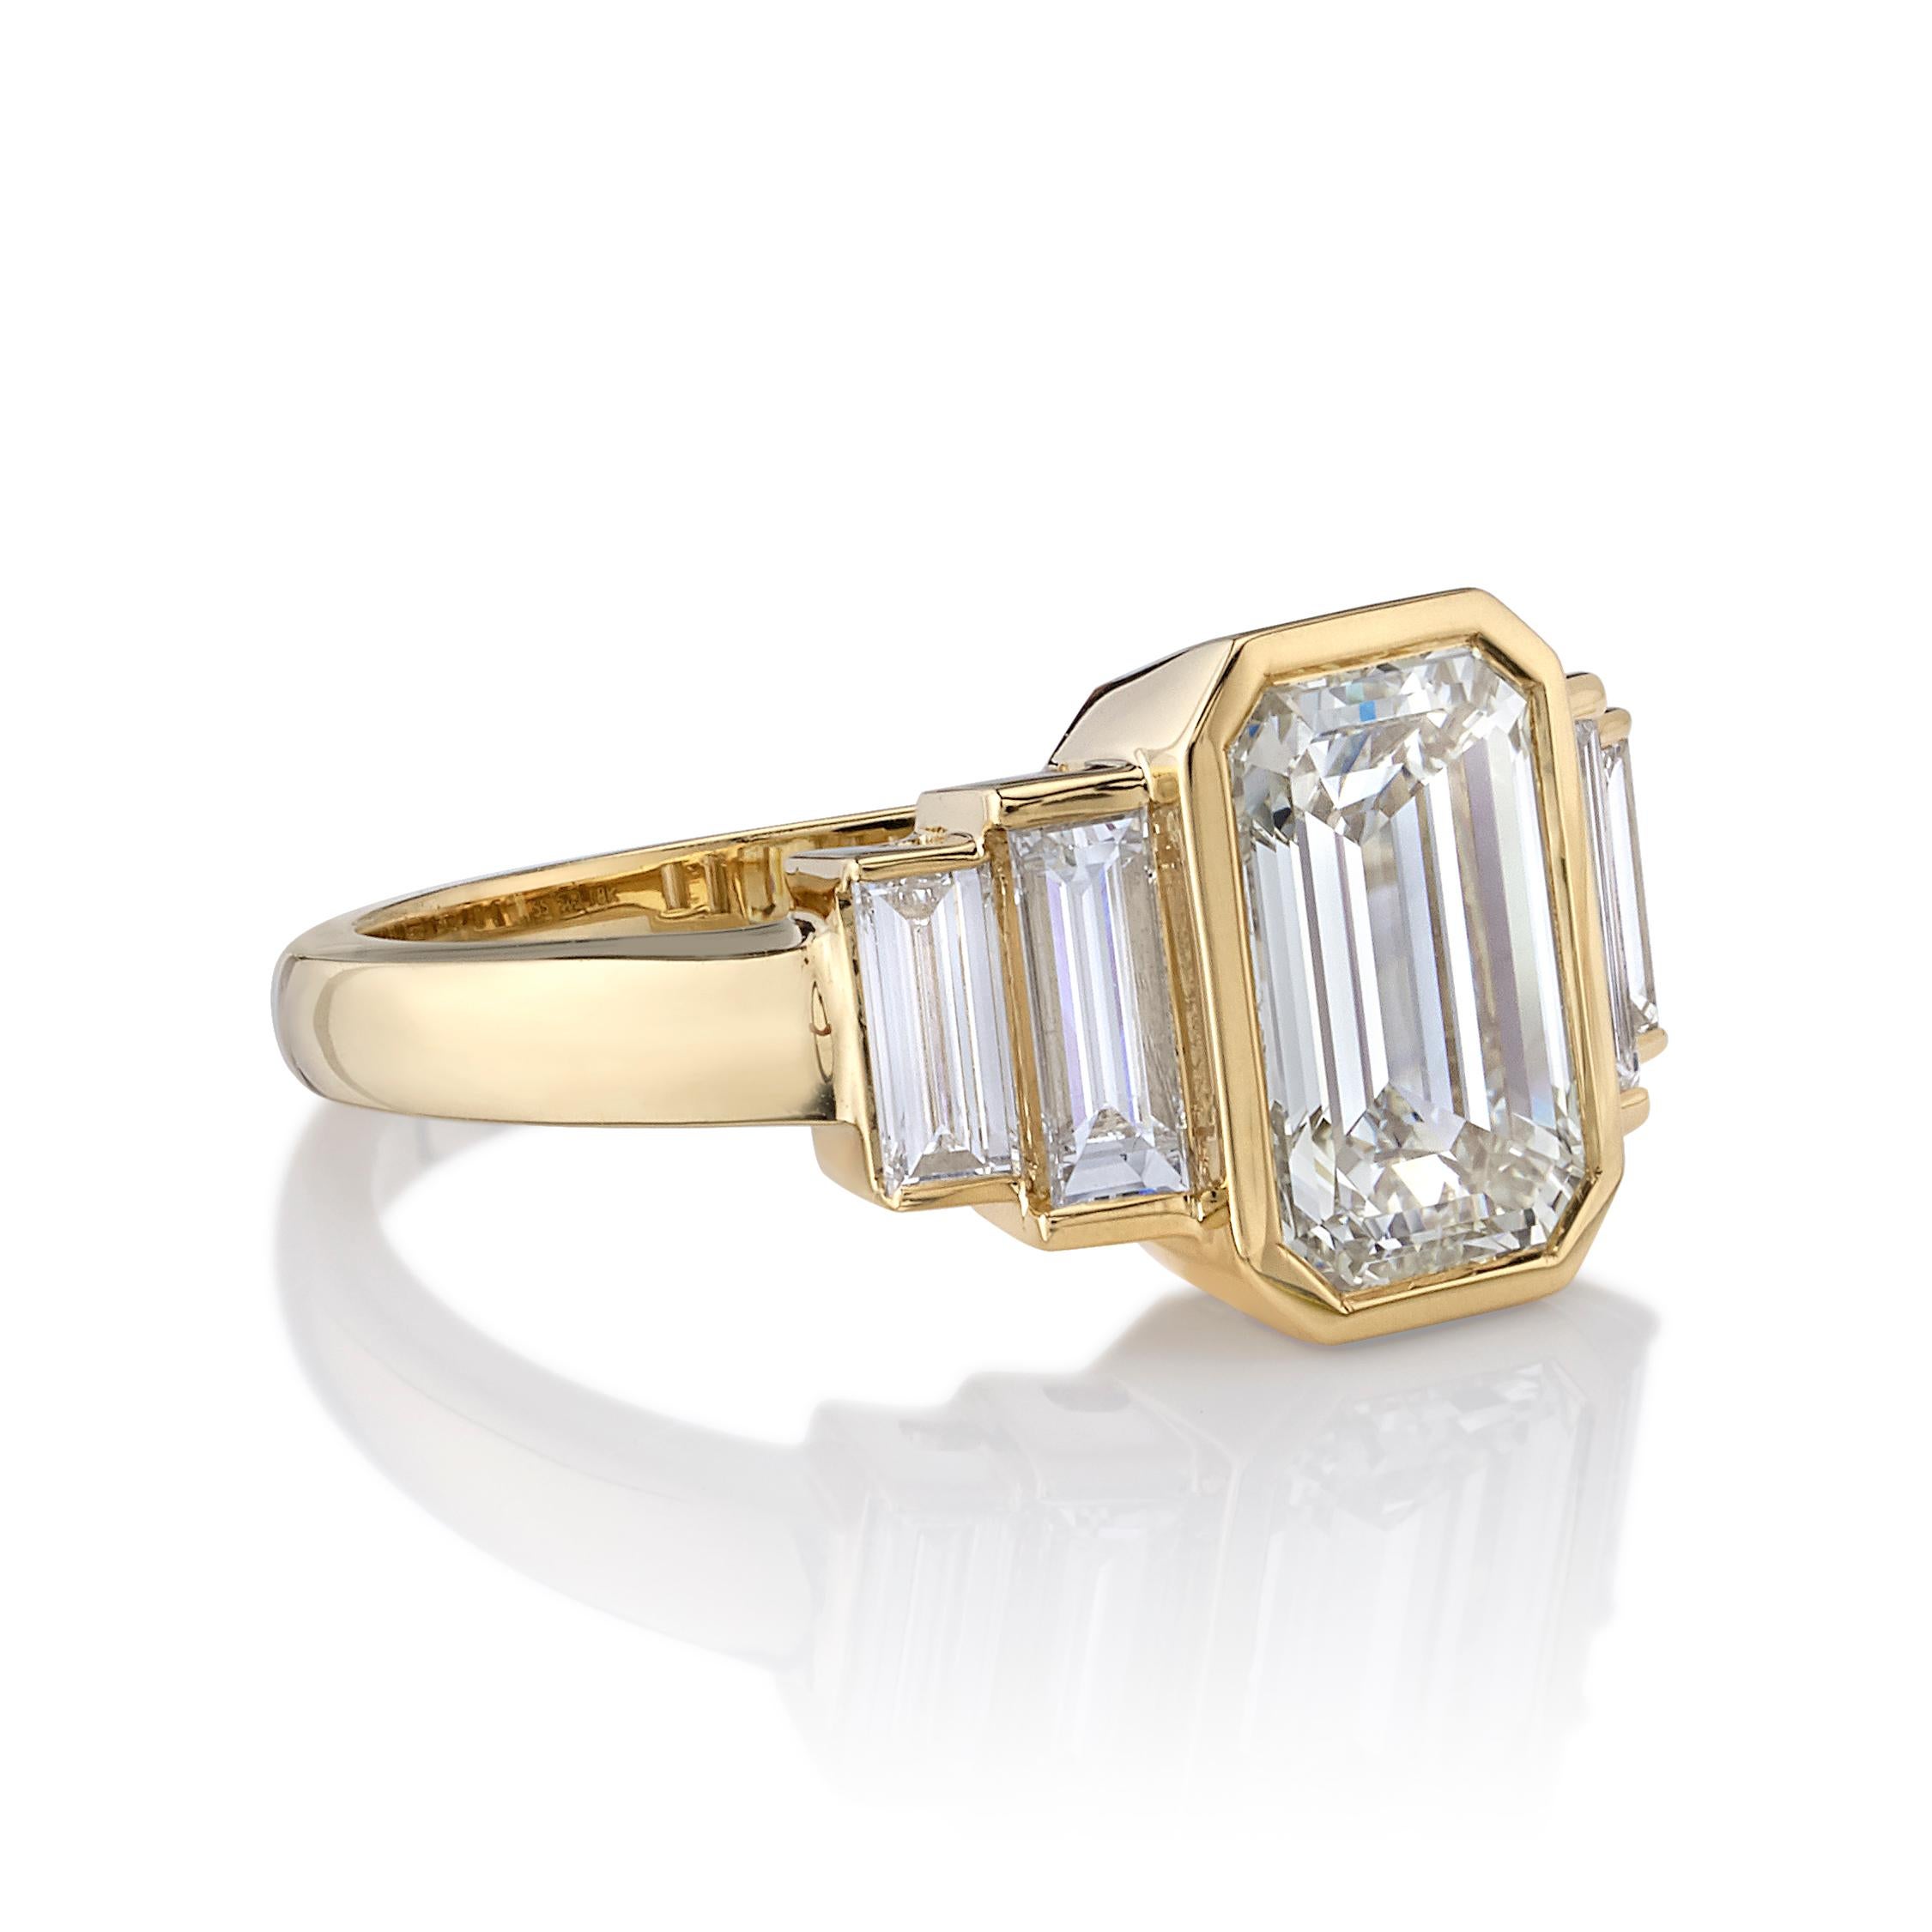 2.00ctw O-P/VS1 GIA certified Emerald cut diamond with 0.49ctw Baguette cut accent diamonds set in a handcrafted 18K yellow gold mounting.

Ring is a size 6 and can be sized to fit.